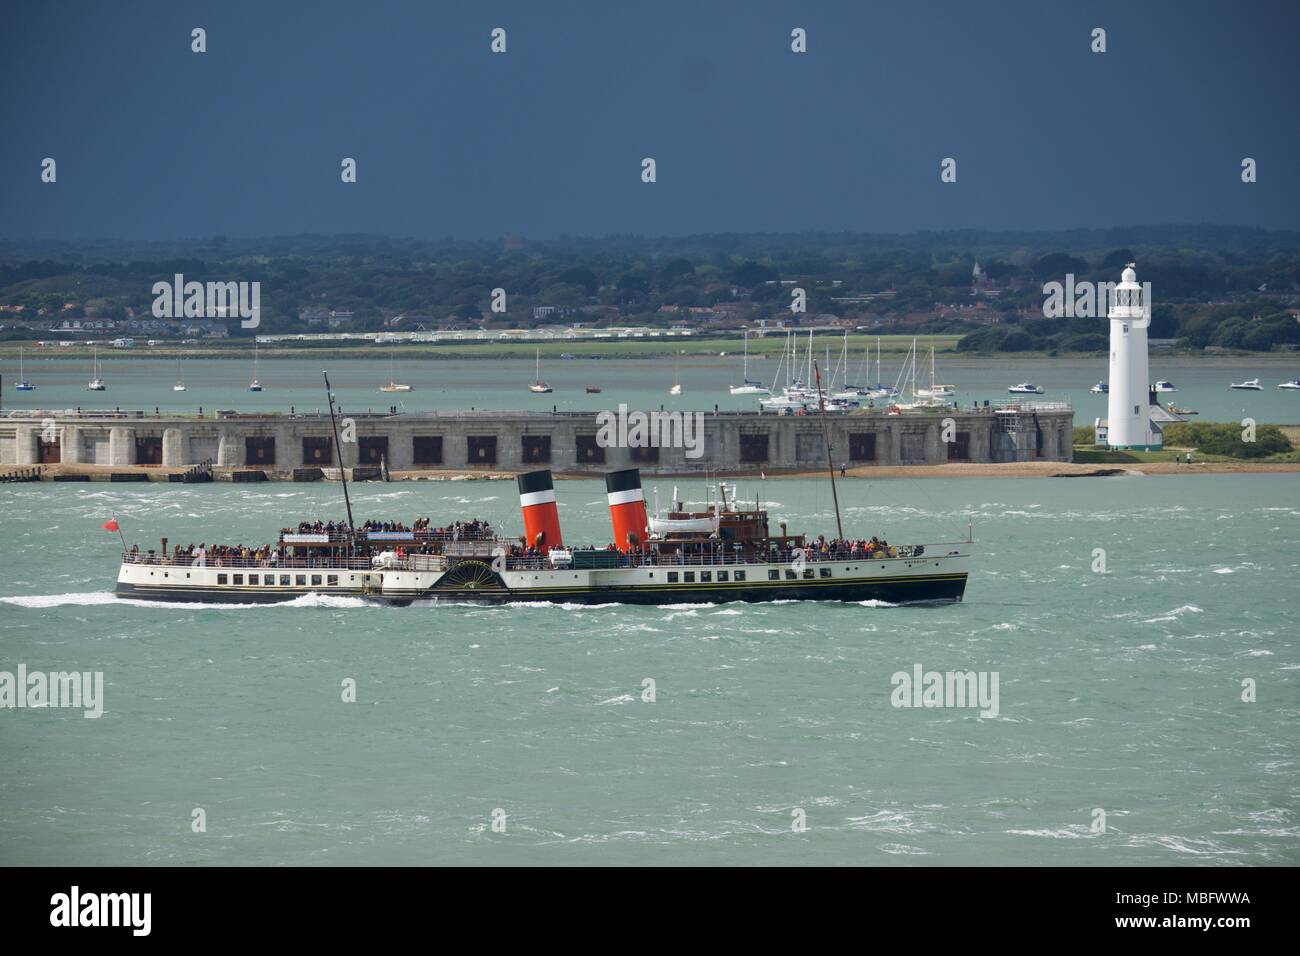 PS Waverley the last paddle steamer passenger ship on the Solent passing Hurst Spit, lighthouse and Hurst Castle on a day with a dark stormy sky Stock Photo